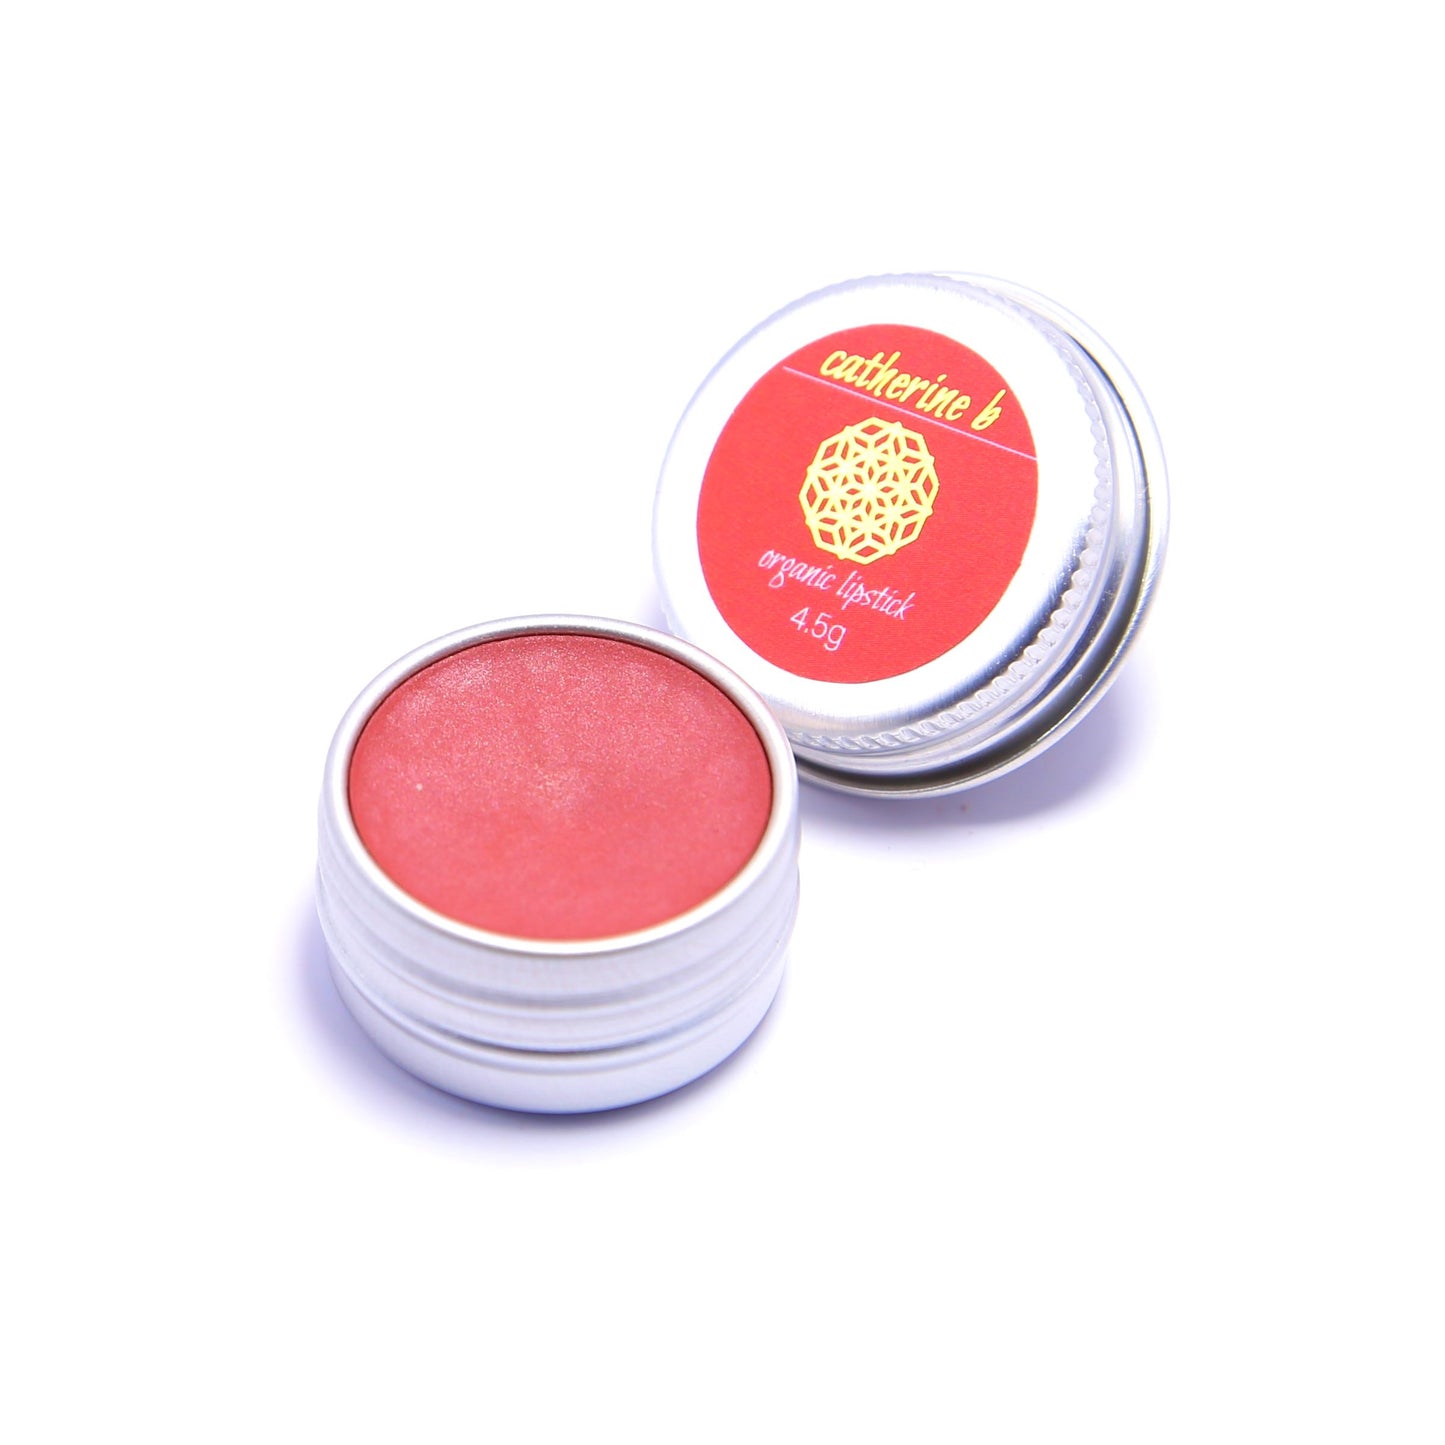  Soft Peach Pink Organic Lipstick available in 4.5g tin 